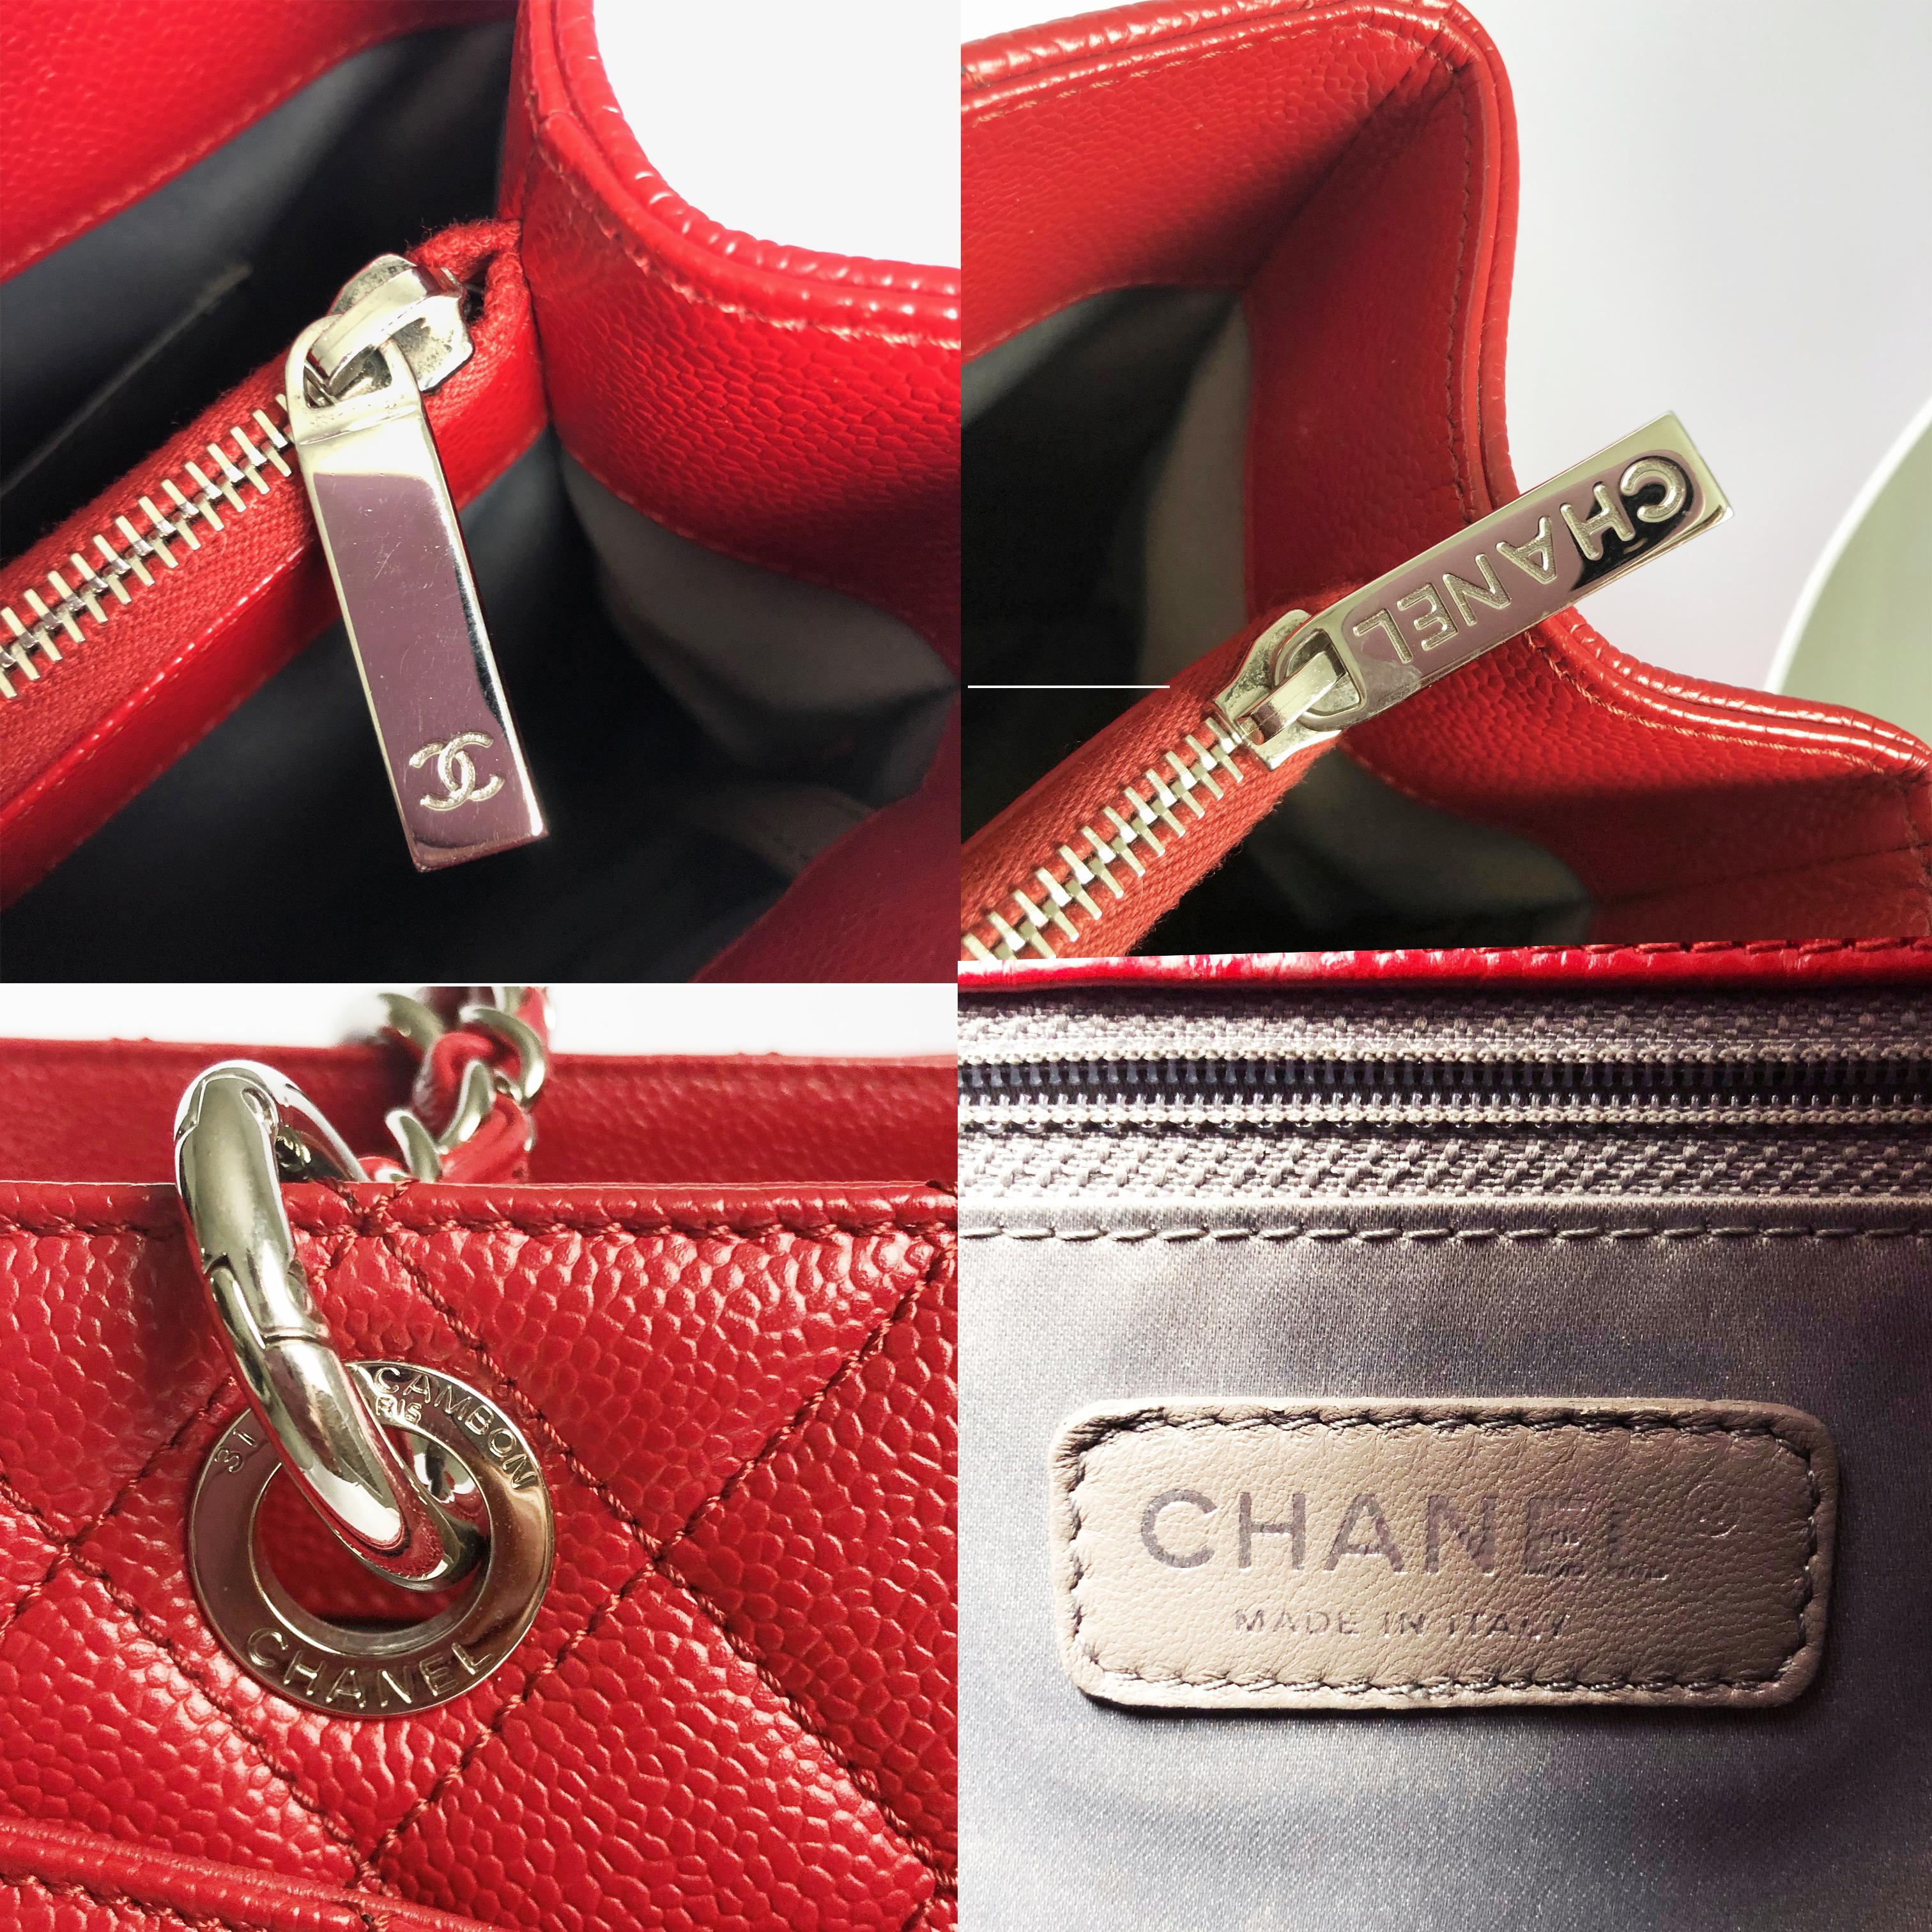 Chanel GST Grand Shopping Tote Shoulder Bag Red Caviar Leather Silver HW 2013 5